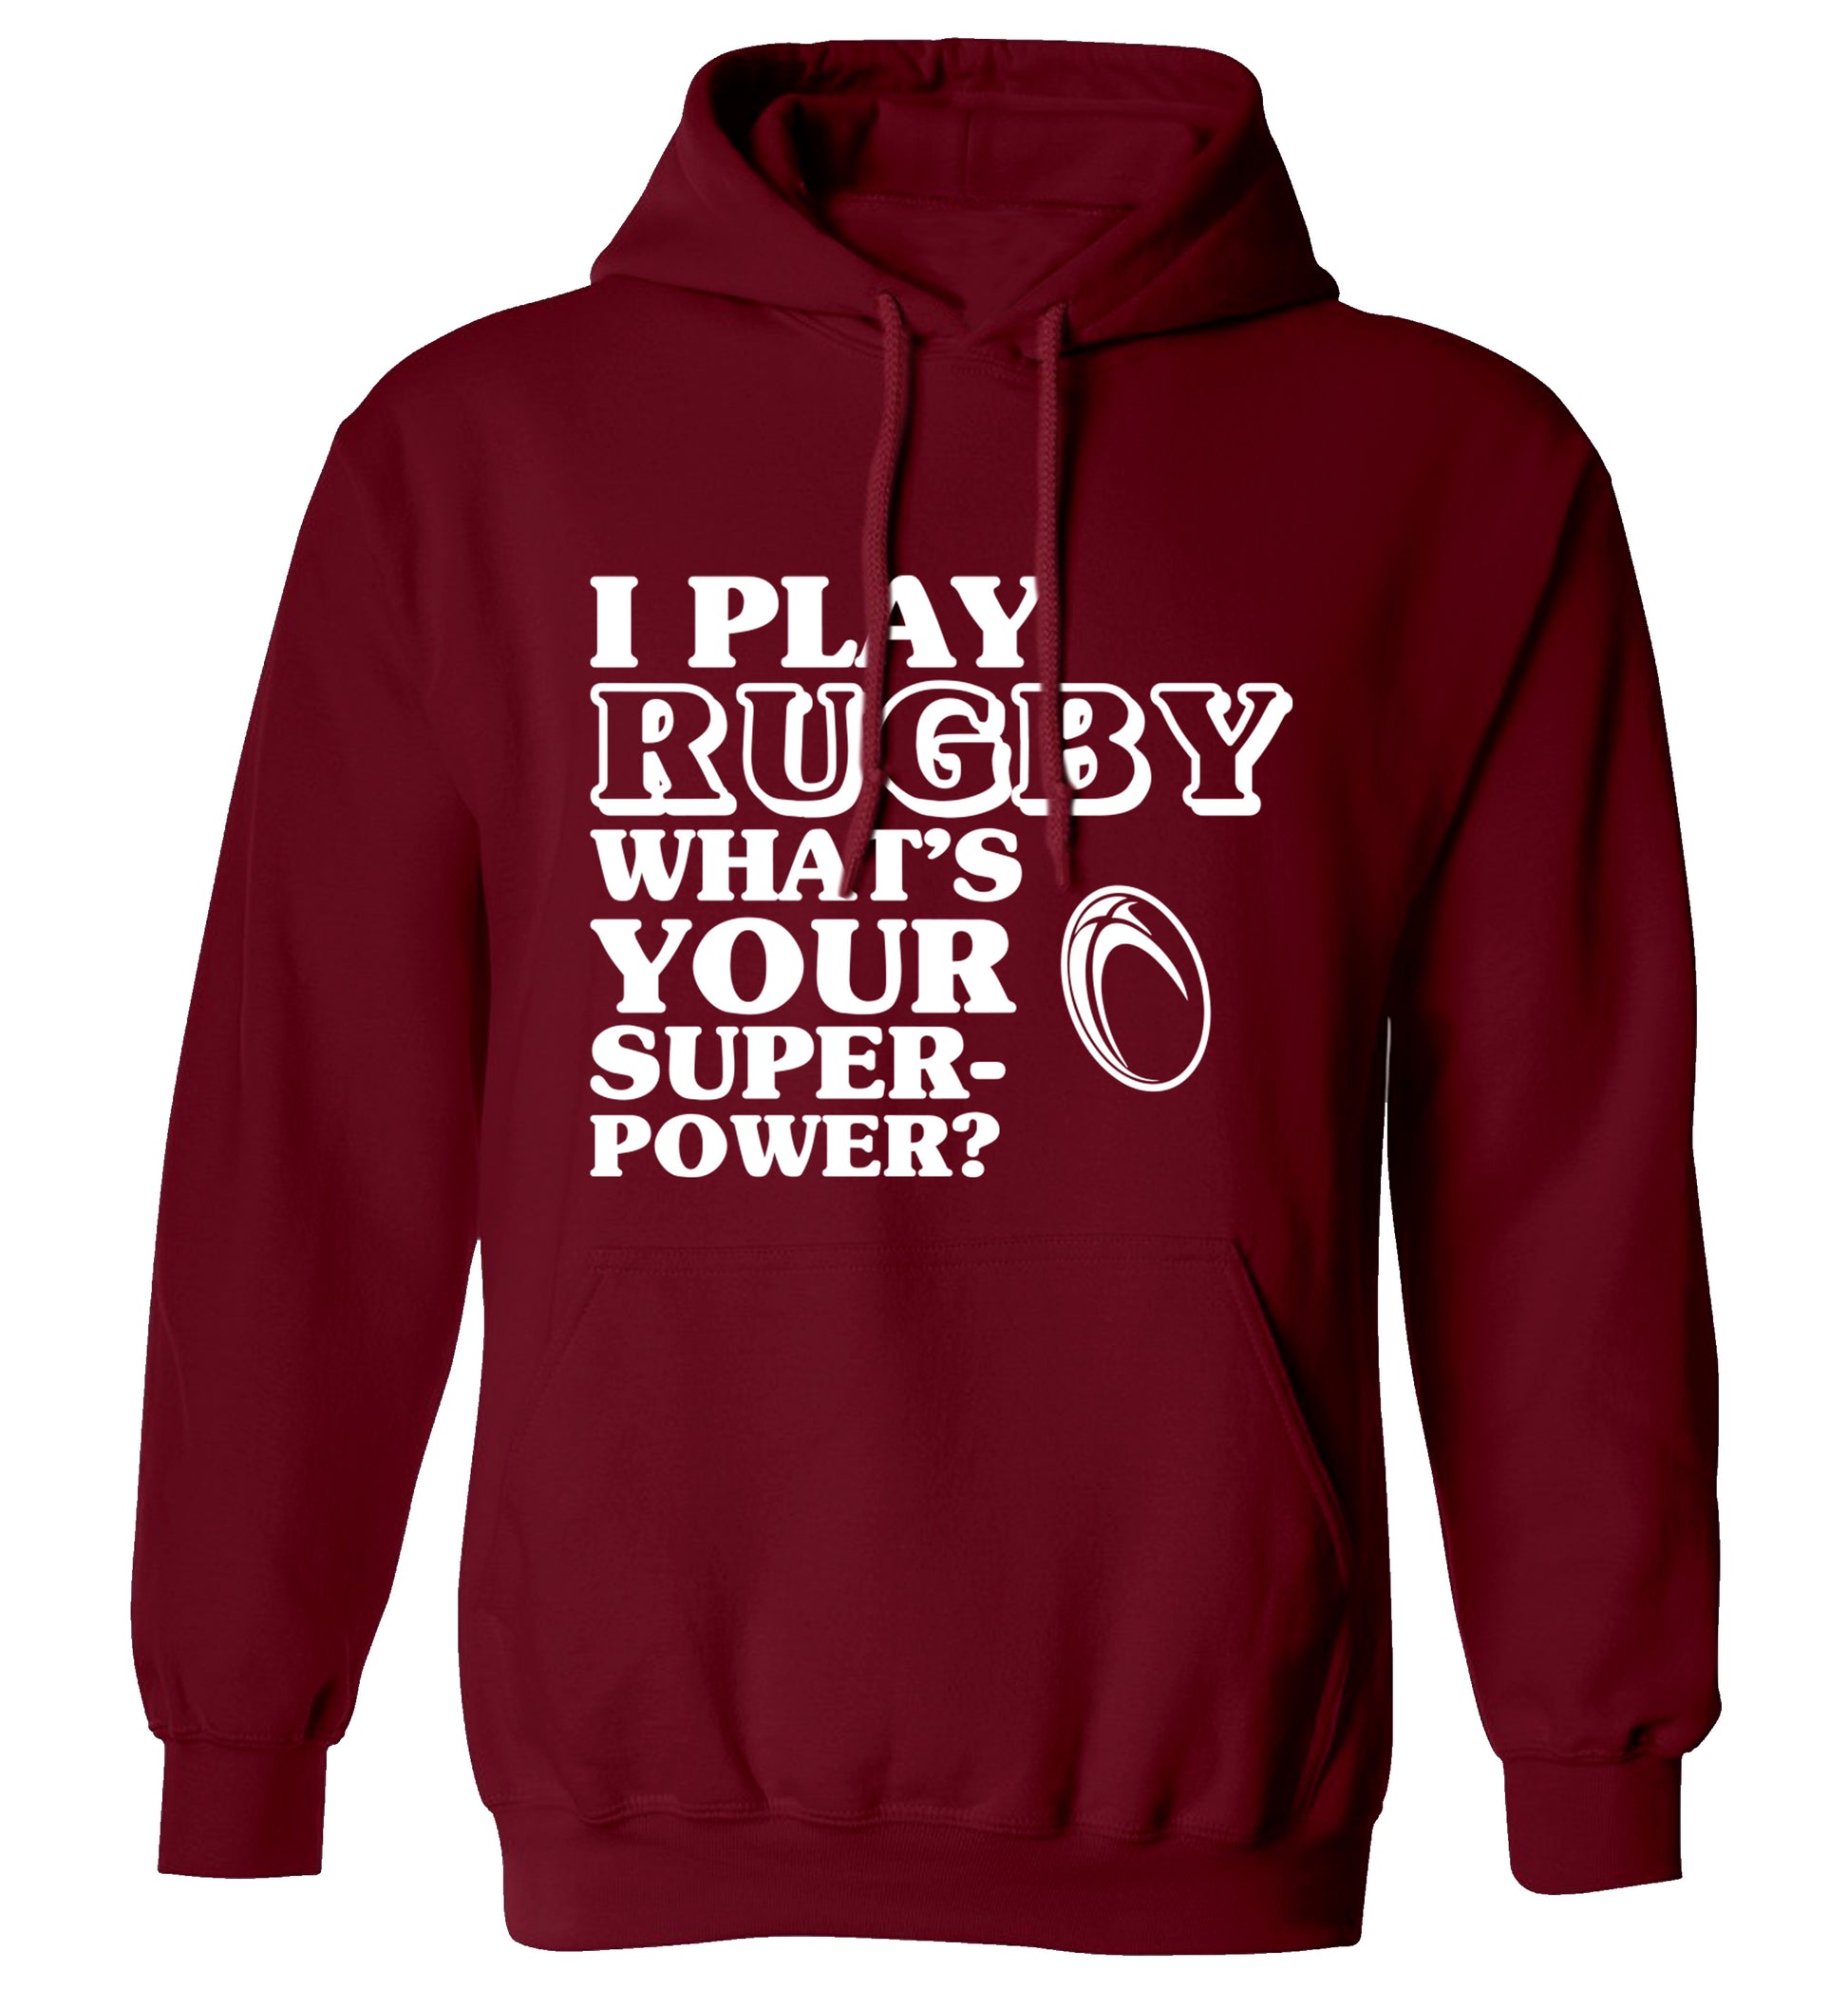 I play rugby what's your superpower? adults unisex maroon hoodie 2XL